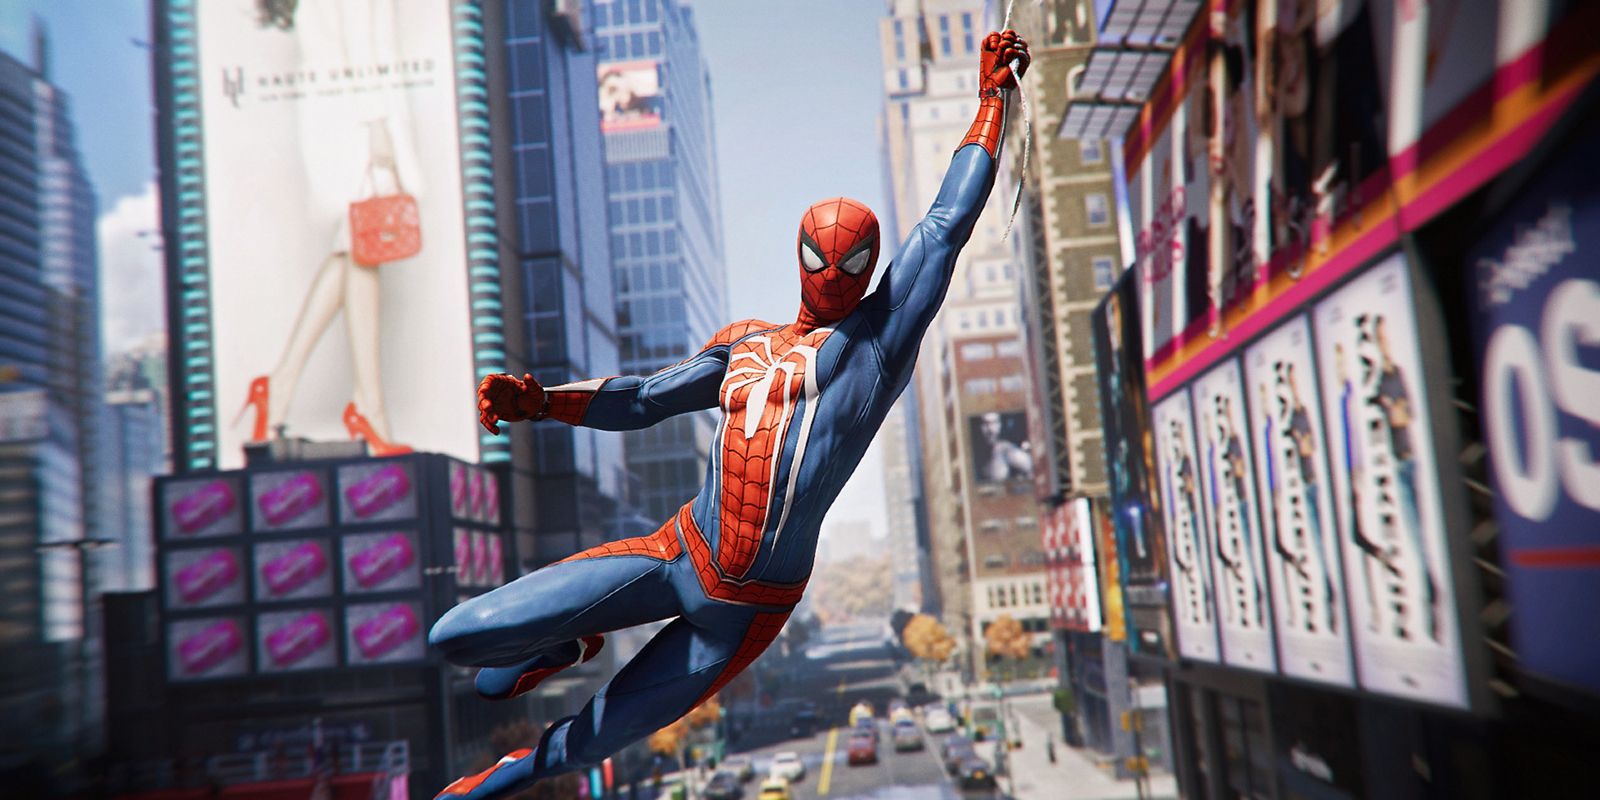 Marvels Spider-Man swinging through the streets of NYC